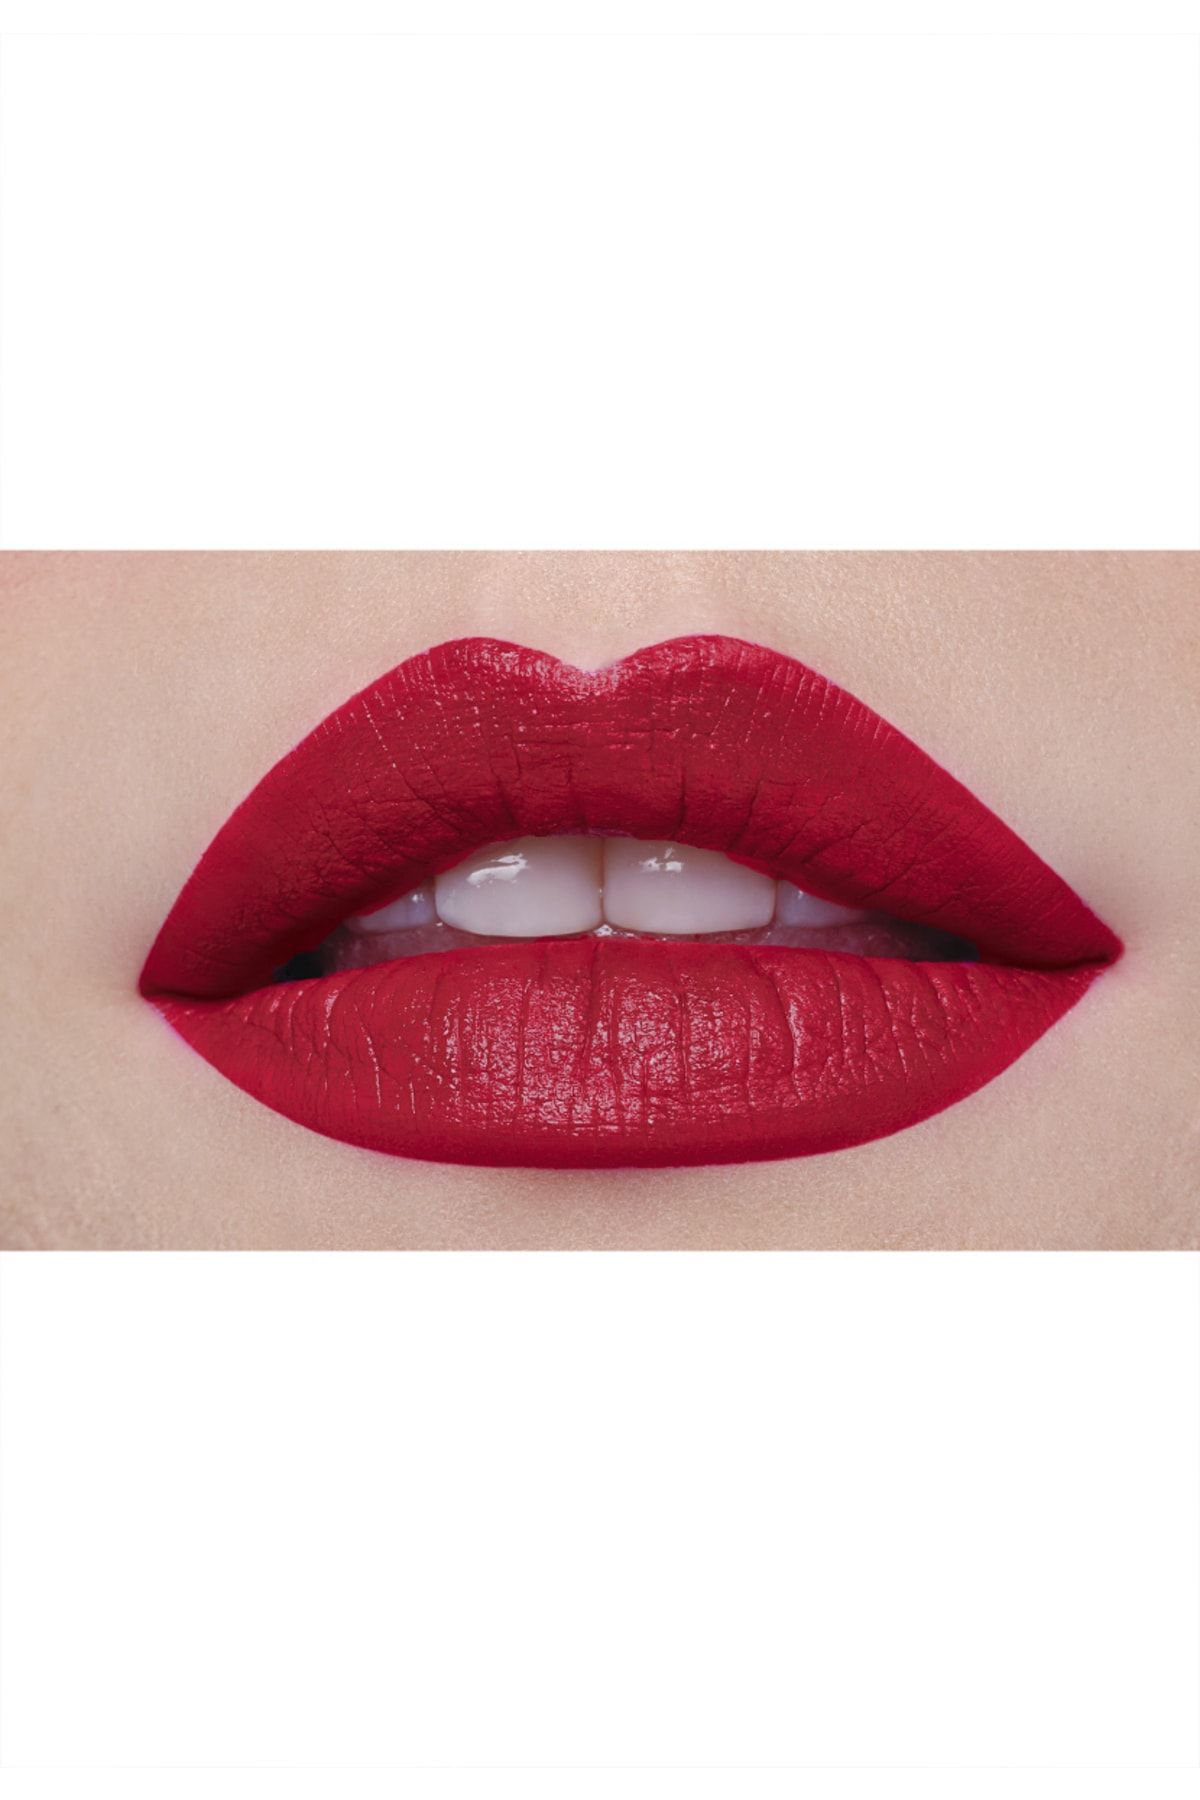 Faberlic Hd Color Lipstick Shade red Memoirs - 4.0 gr.